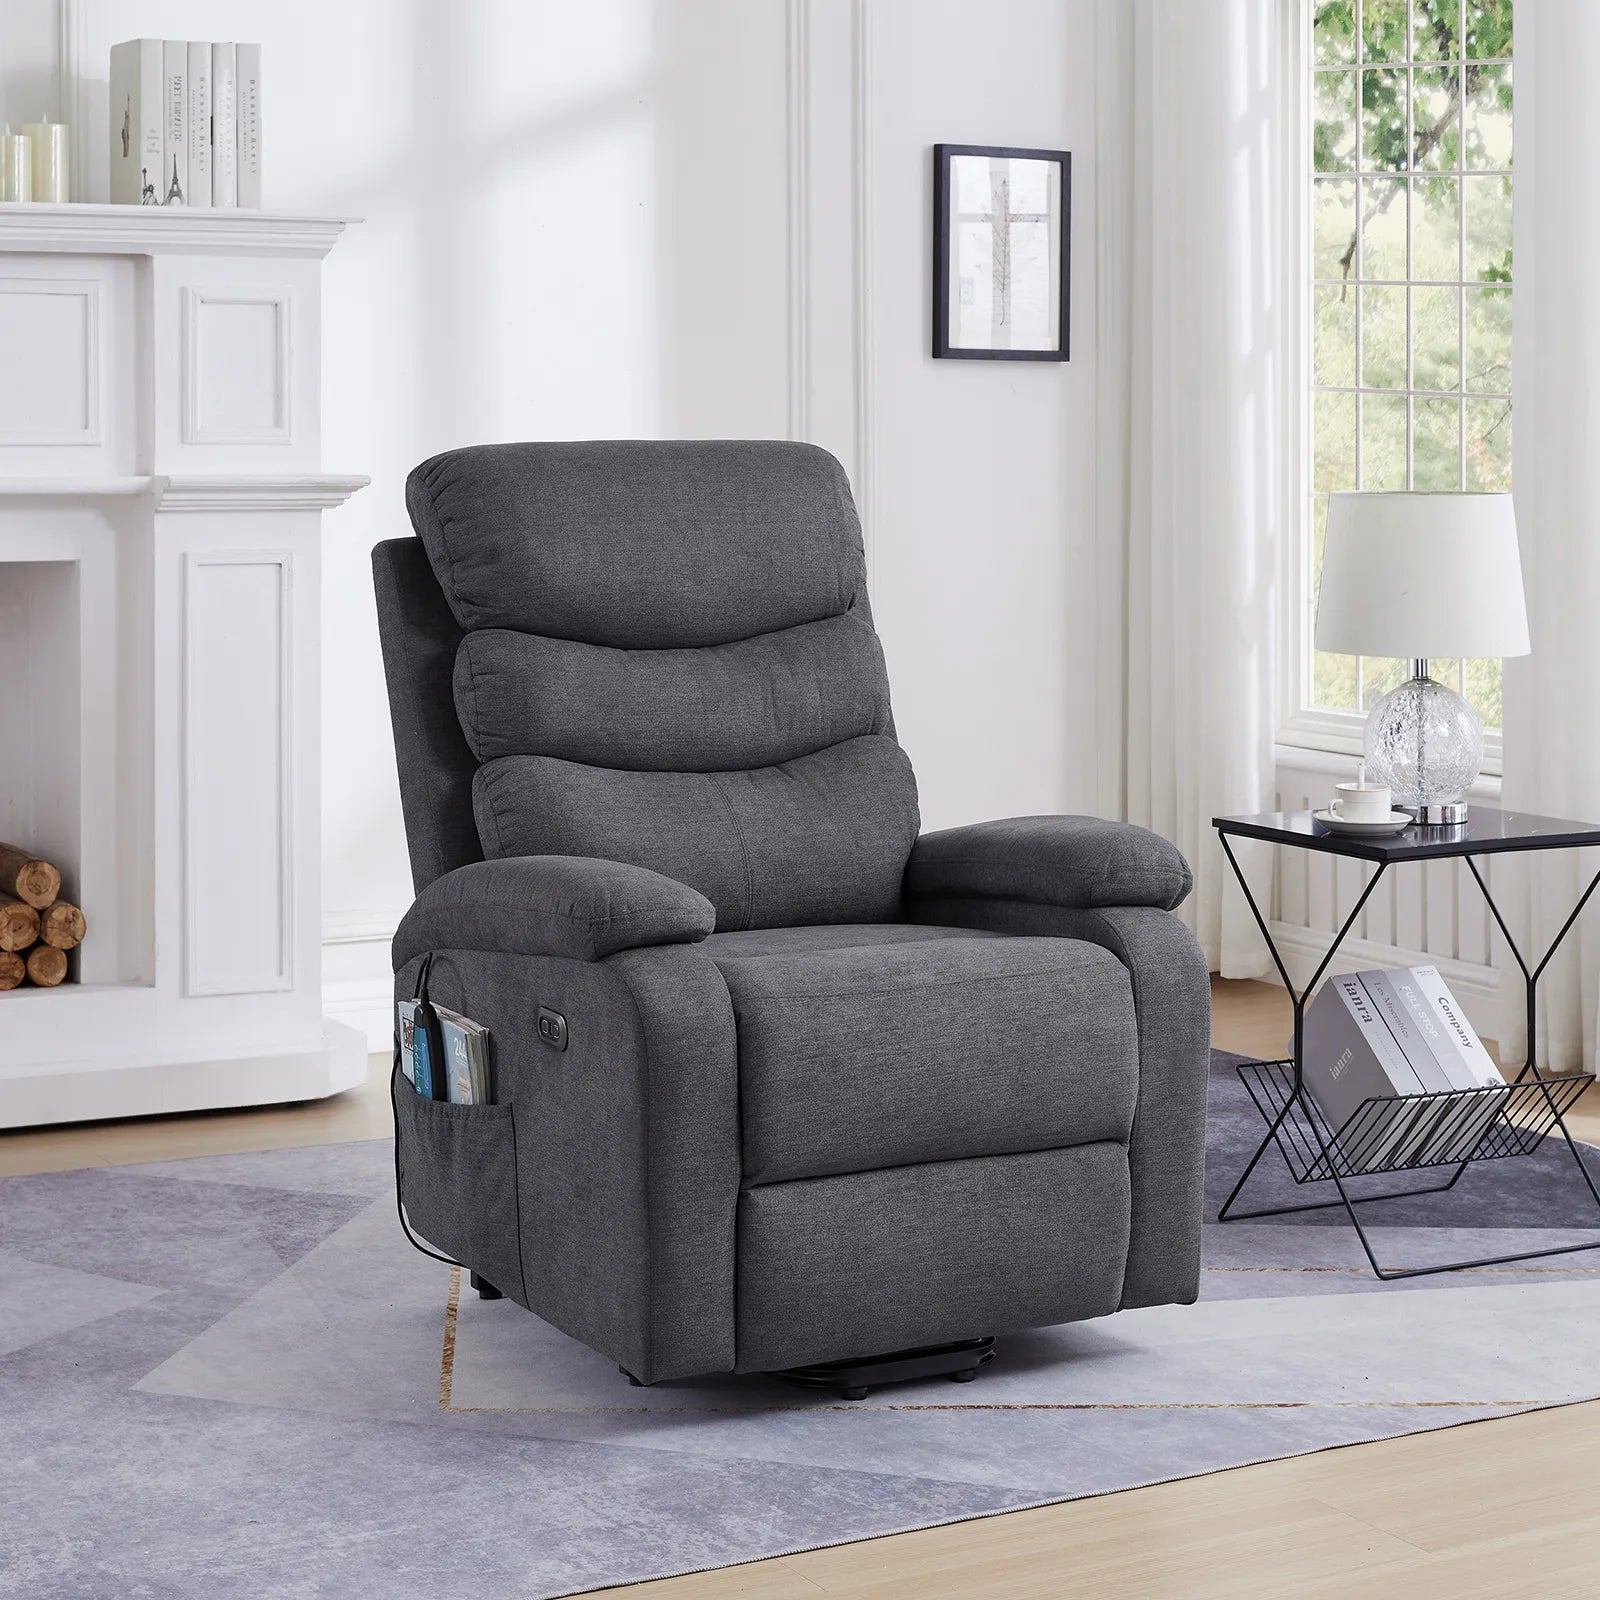 remote control lift recliner chair